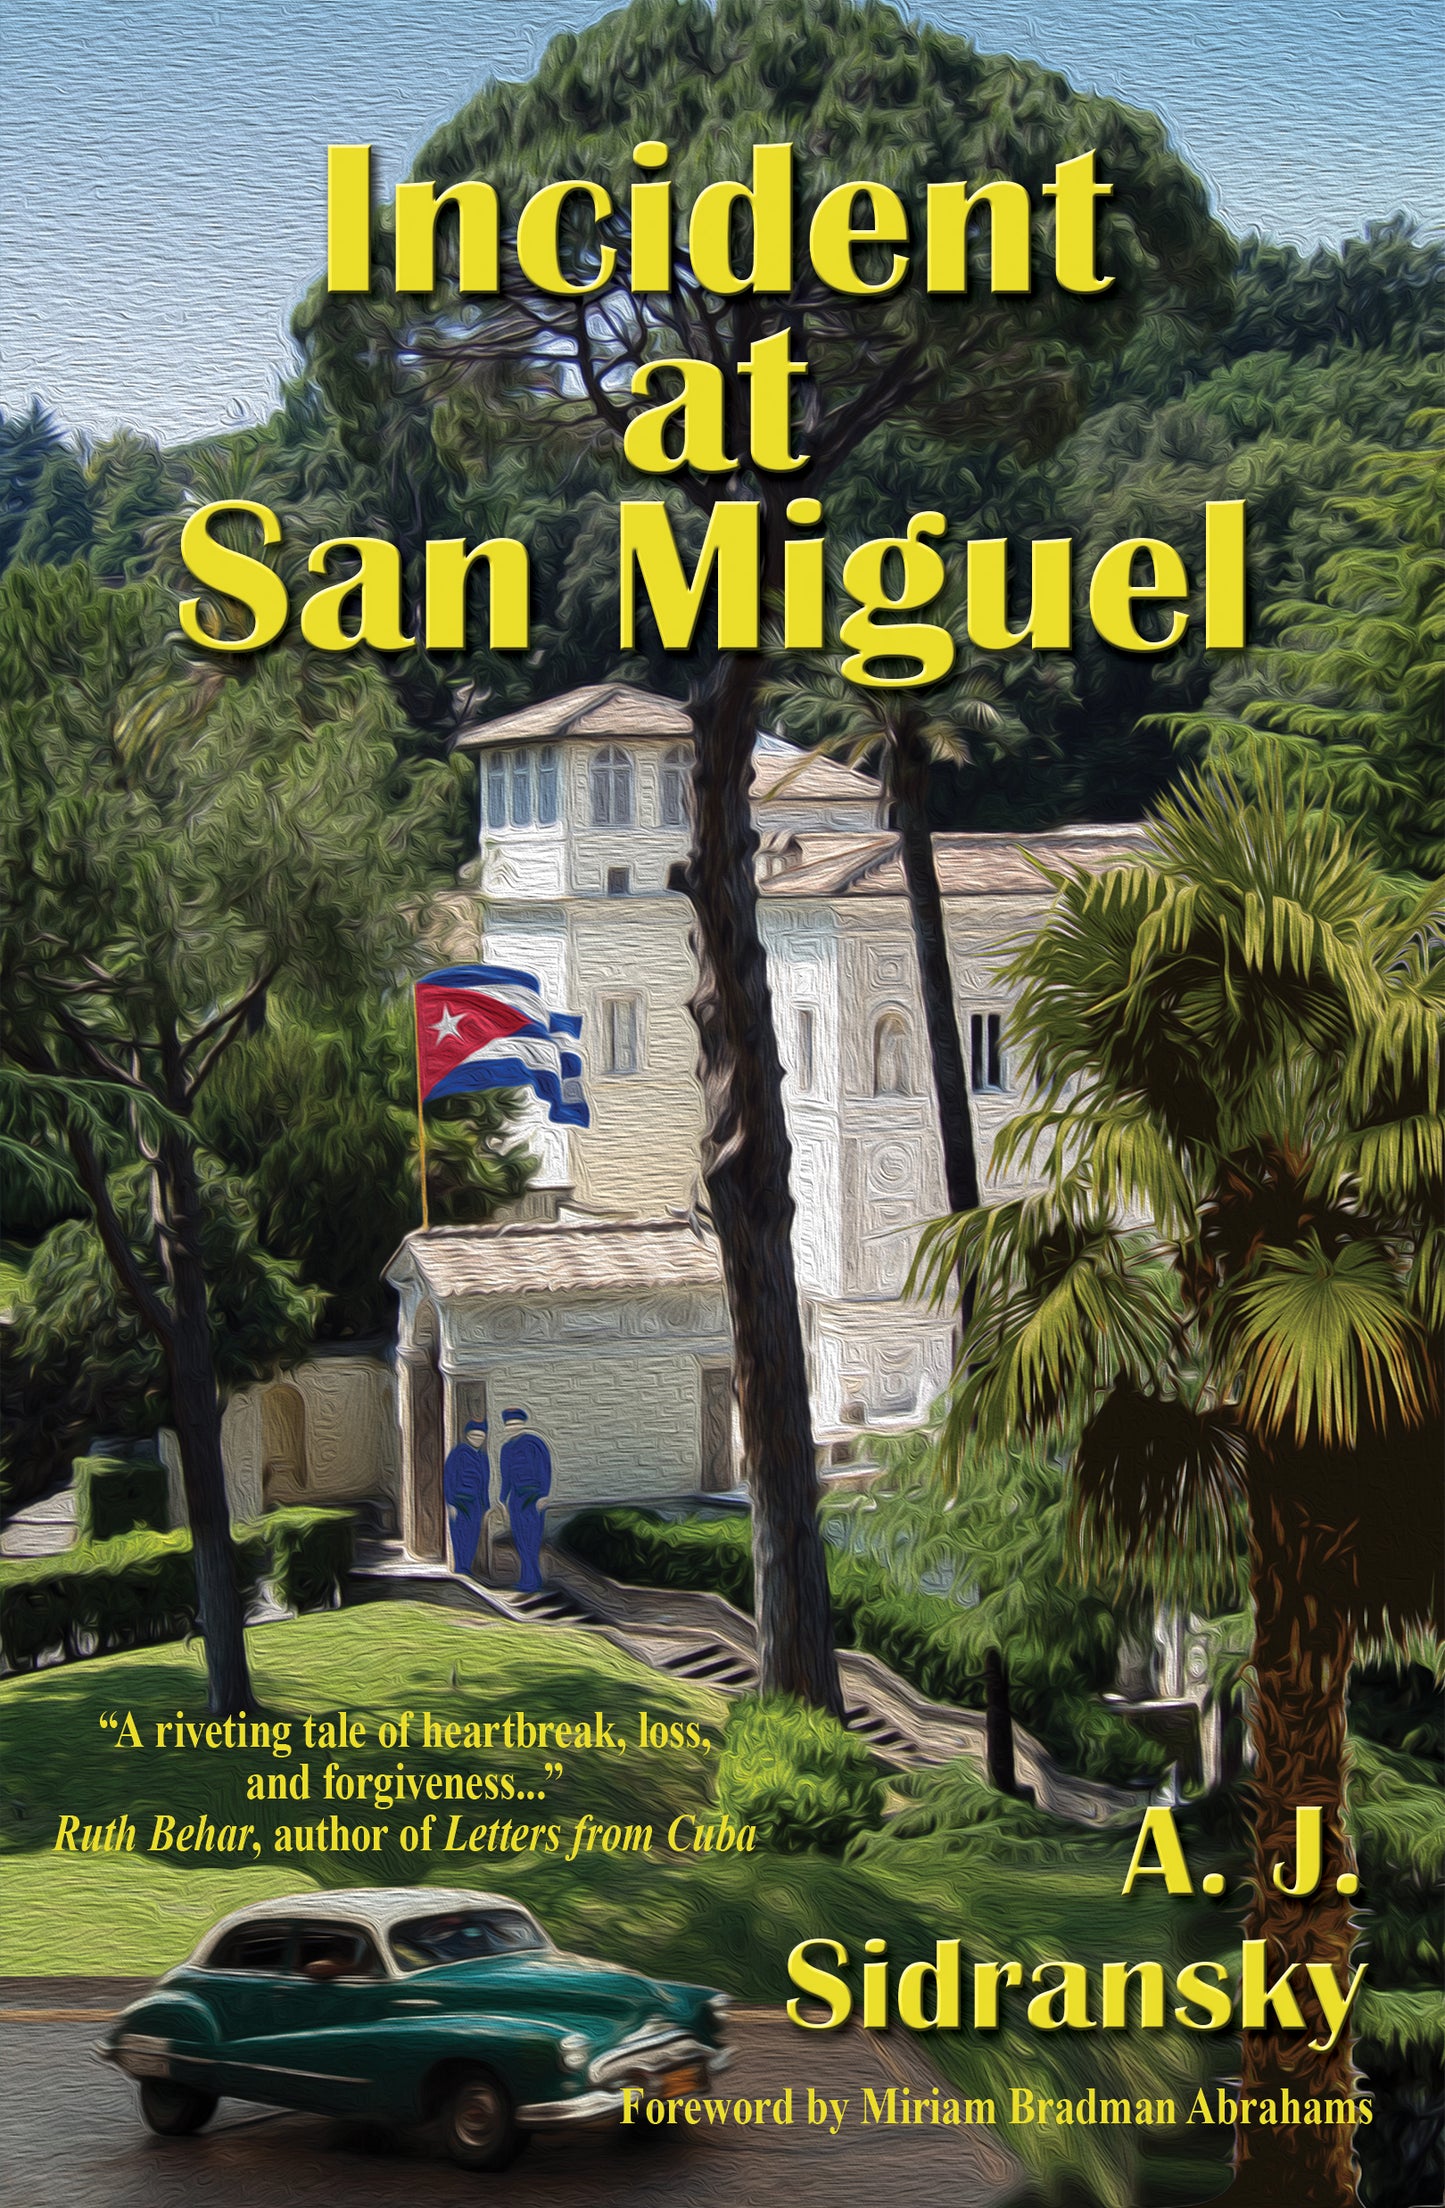 Incident at San Miguel by A. J. Sidransky